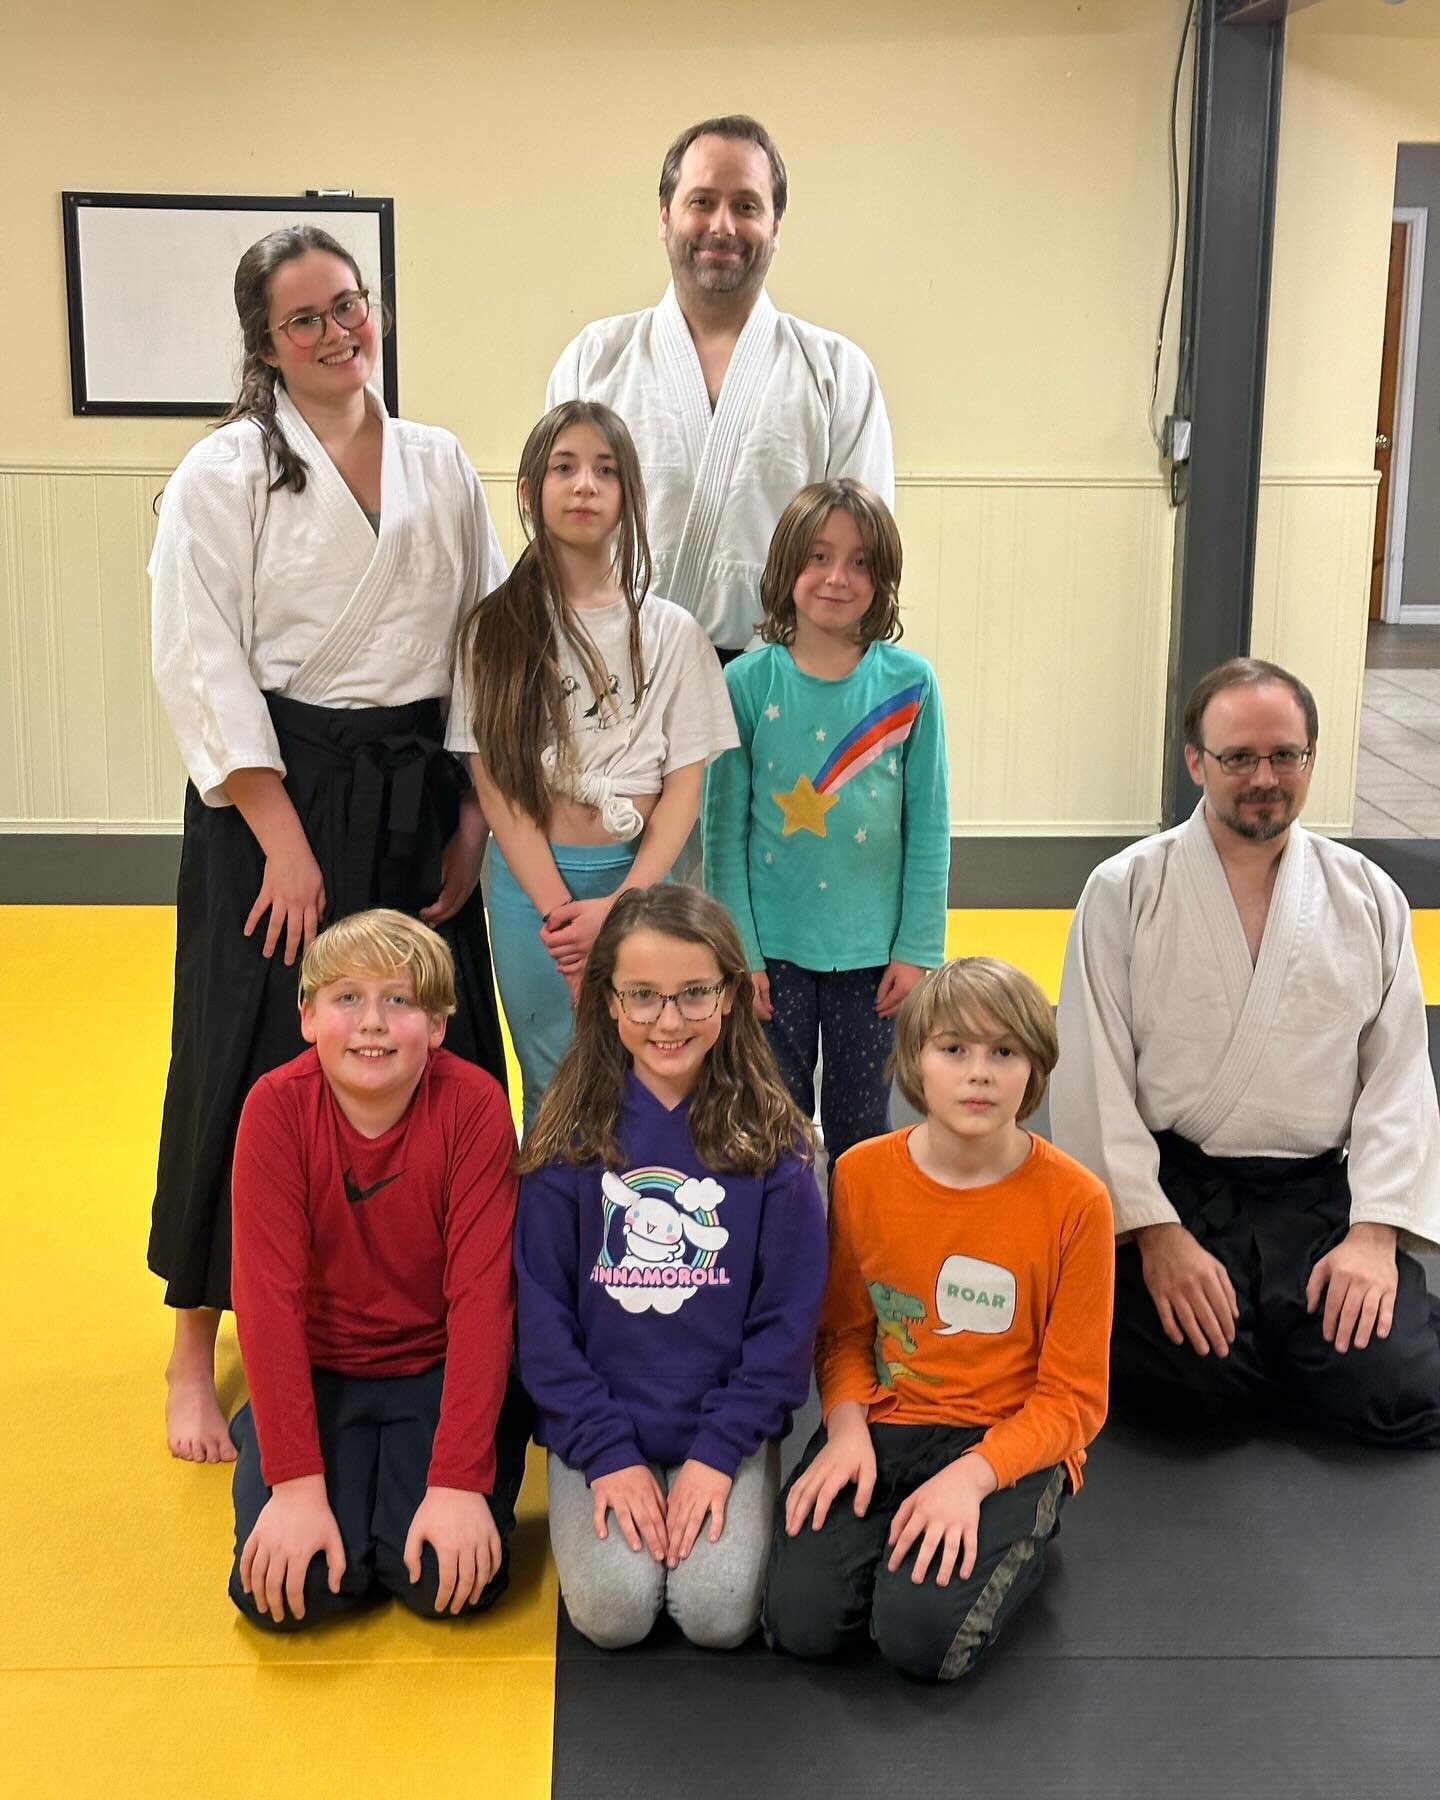 Starting off the week strong with our Monday night kids class! 👏 Join us for two weeks of free classes this month! #aikido #yoshinkan #yoshinkanaikido #dojo #training #martialarts #kıdsmartialarts